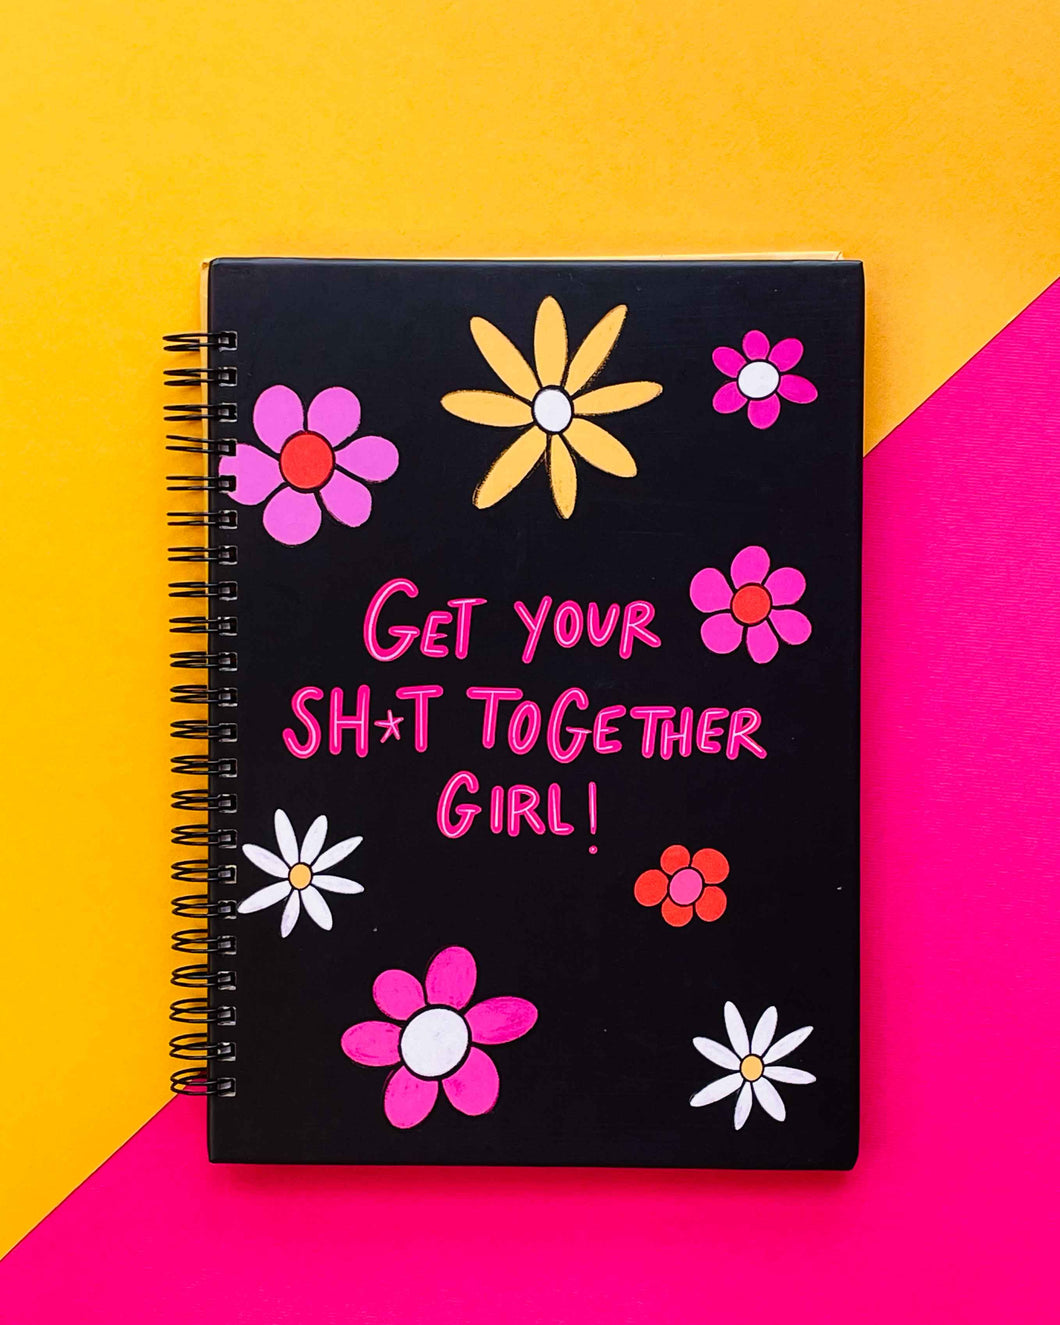 Get your Sh*t Together Girl - Notebook